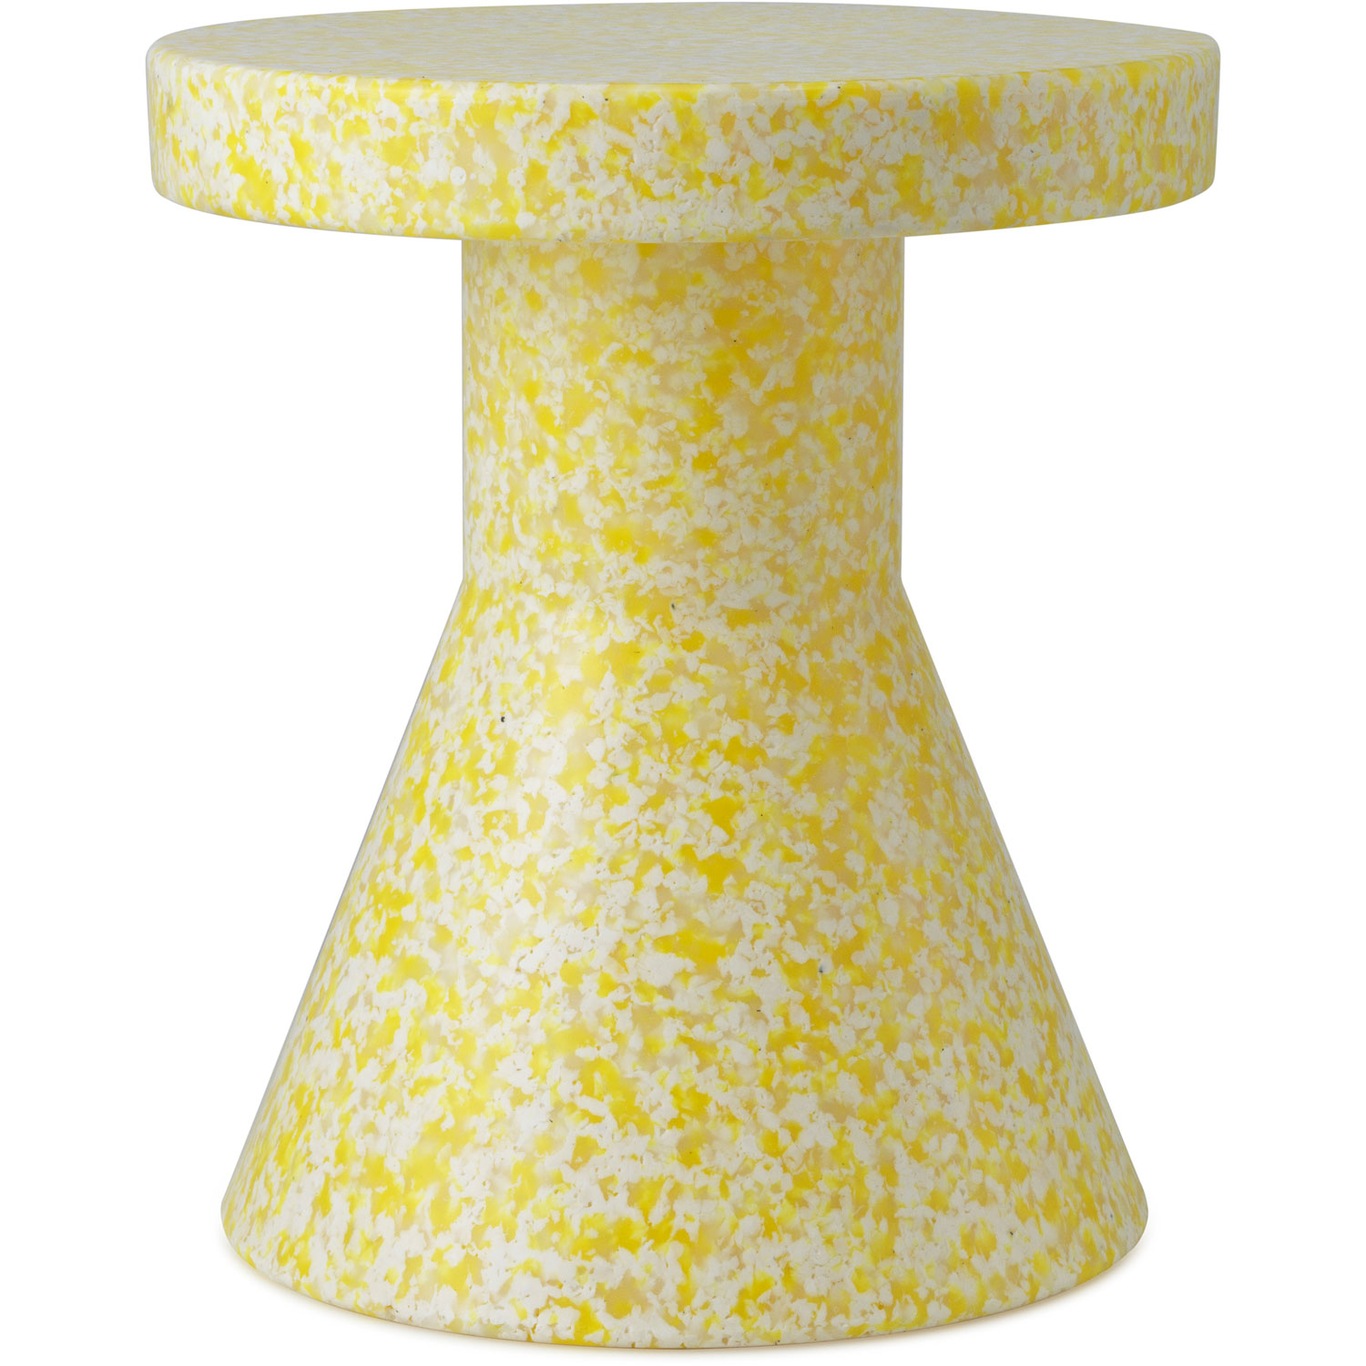 Bit Stool / Side Table, Cone-shaped, Yellow